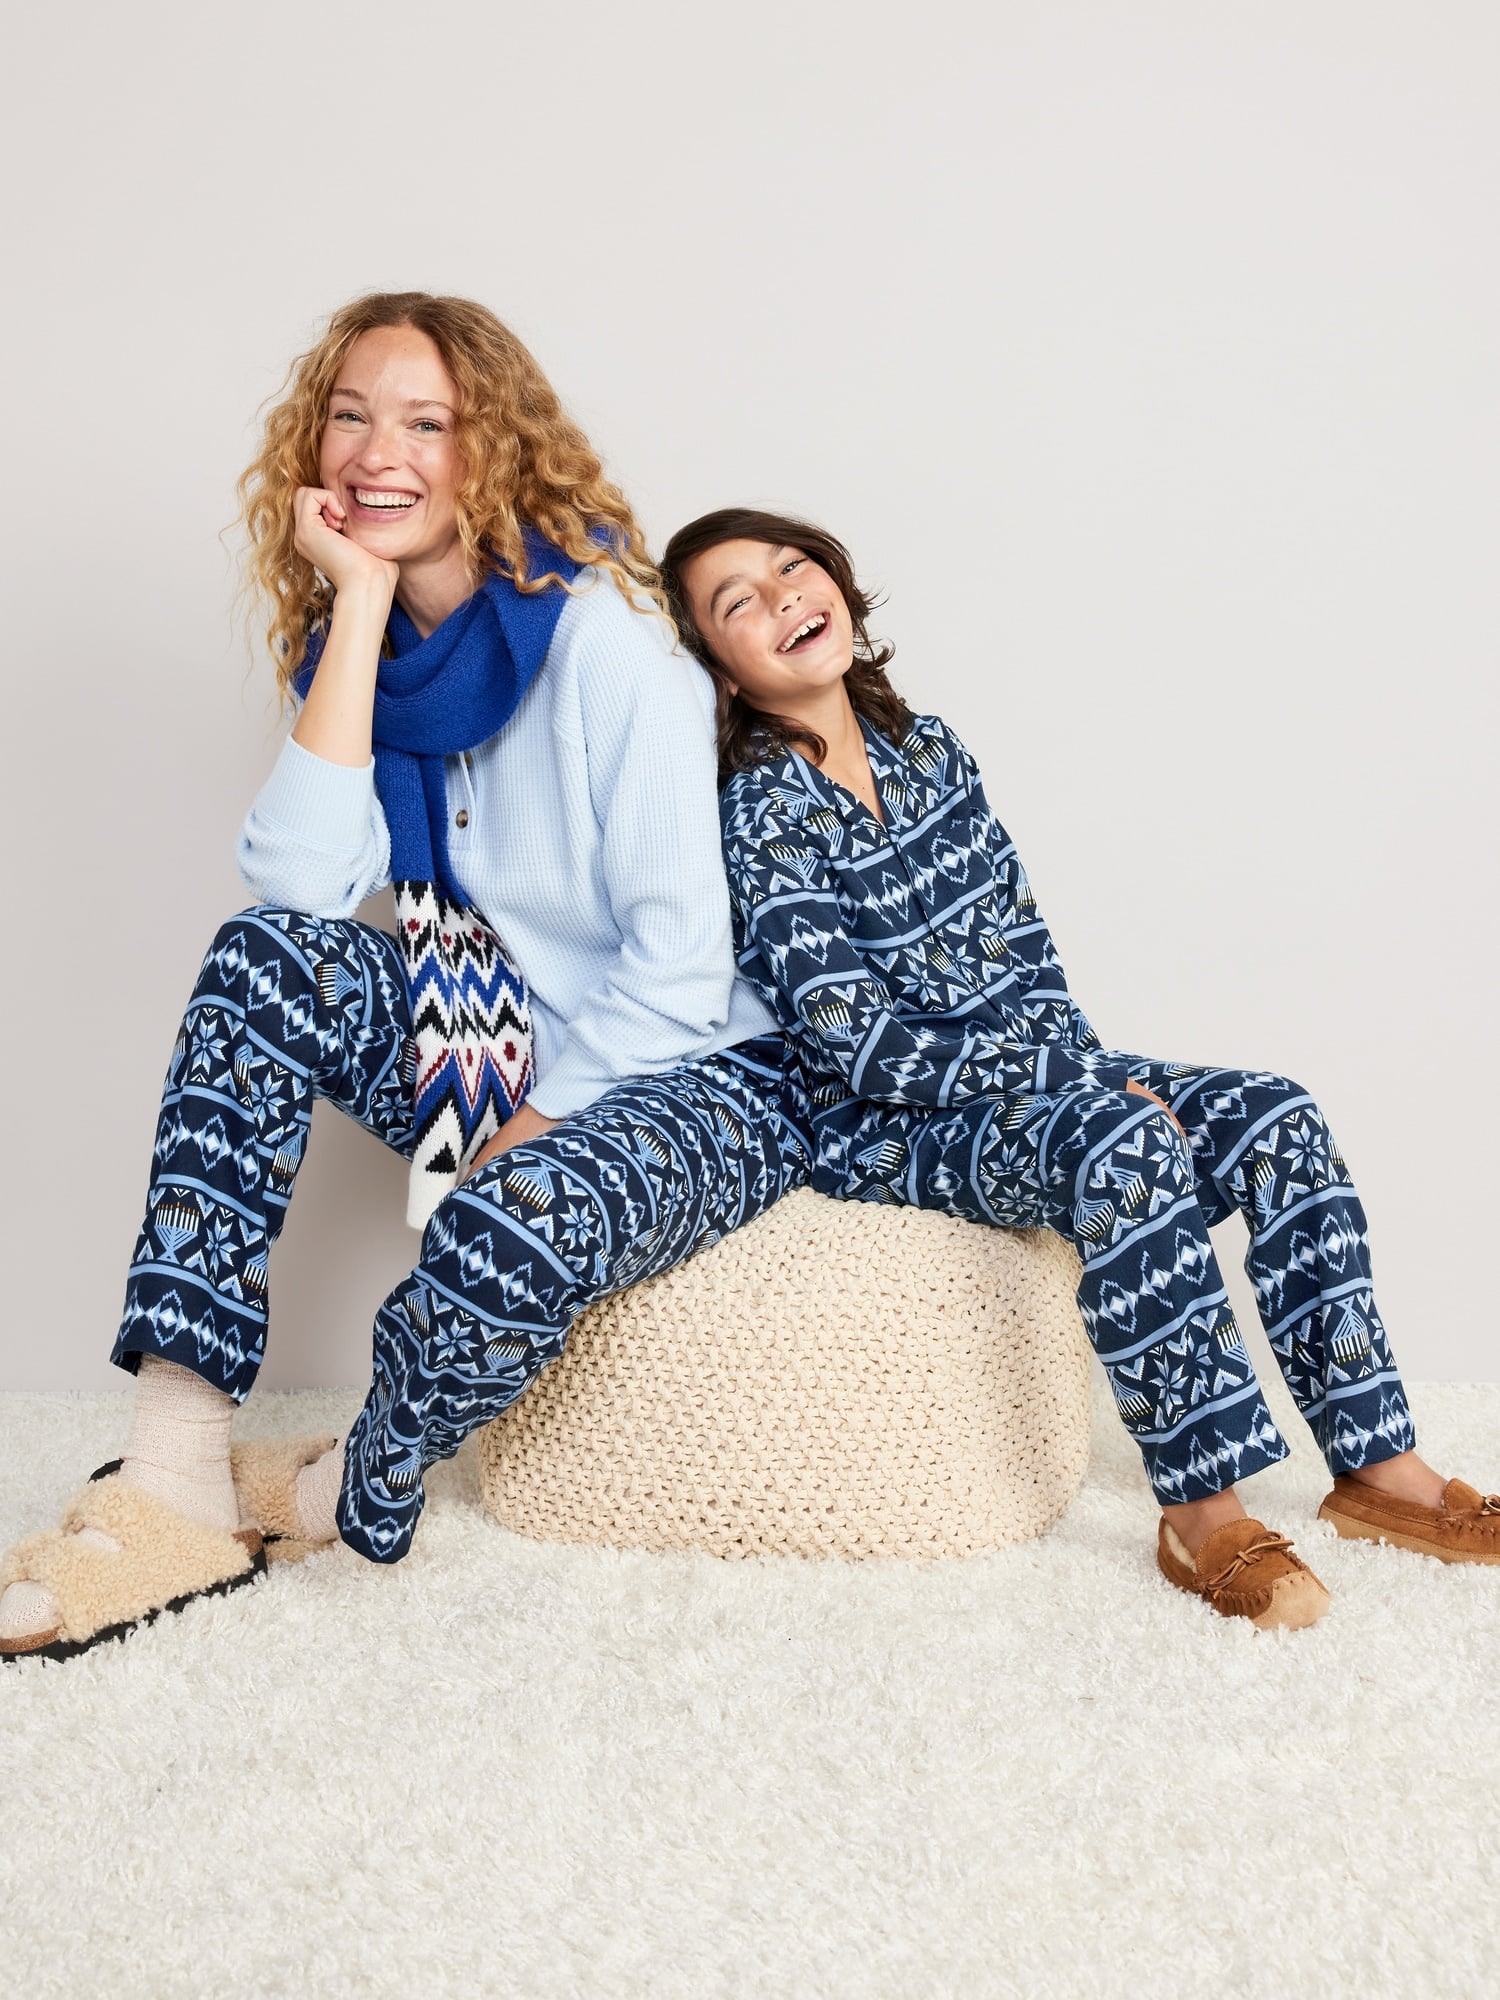 Old Navy 50% Off Pajama Sale: Matching Holiday Family PJs Under $28